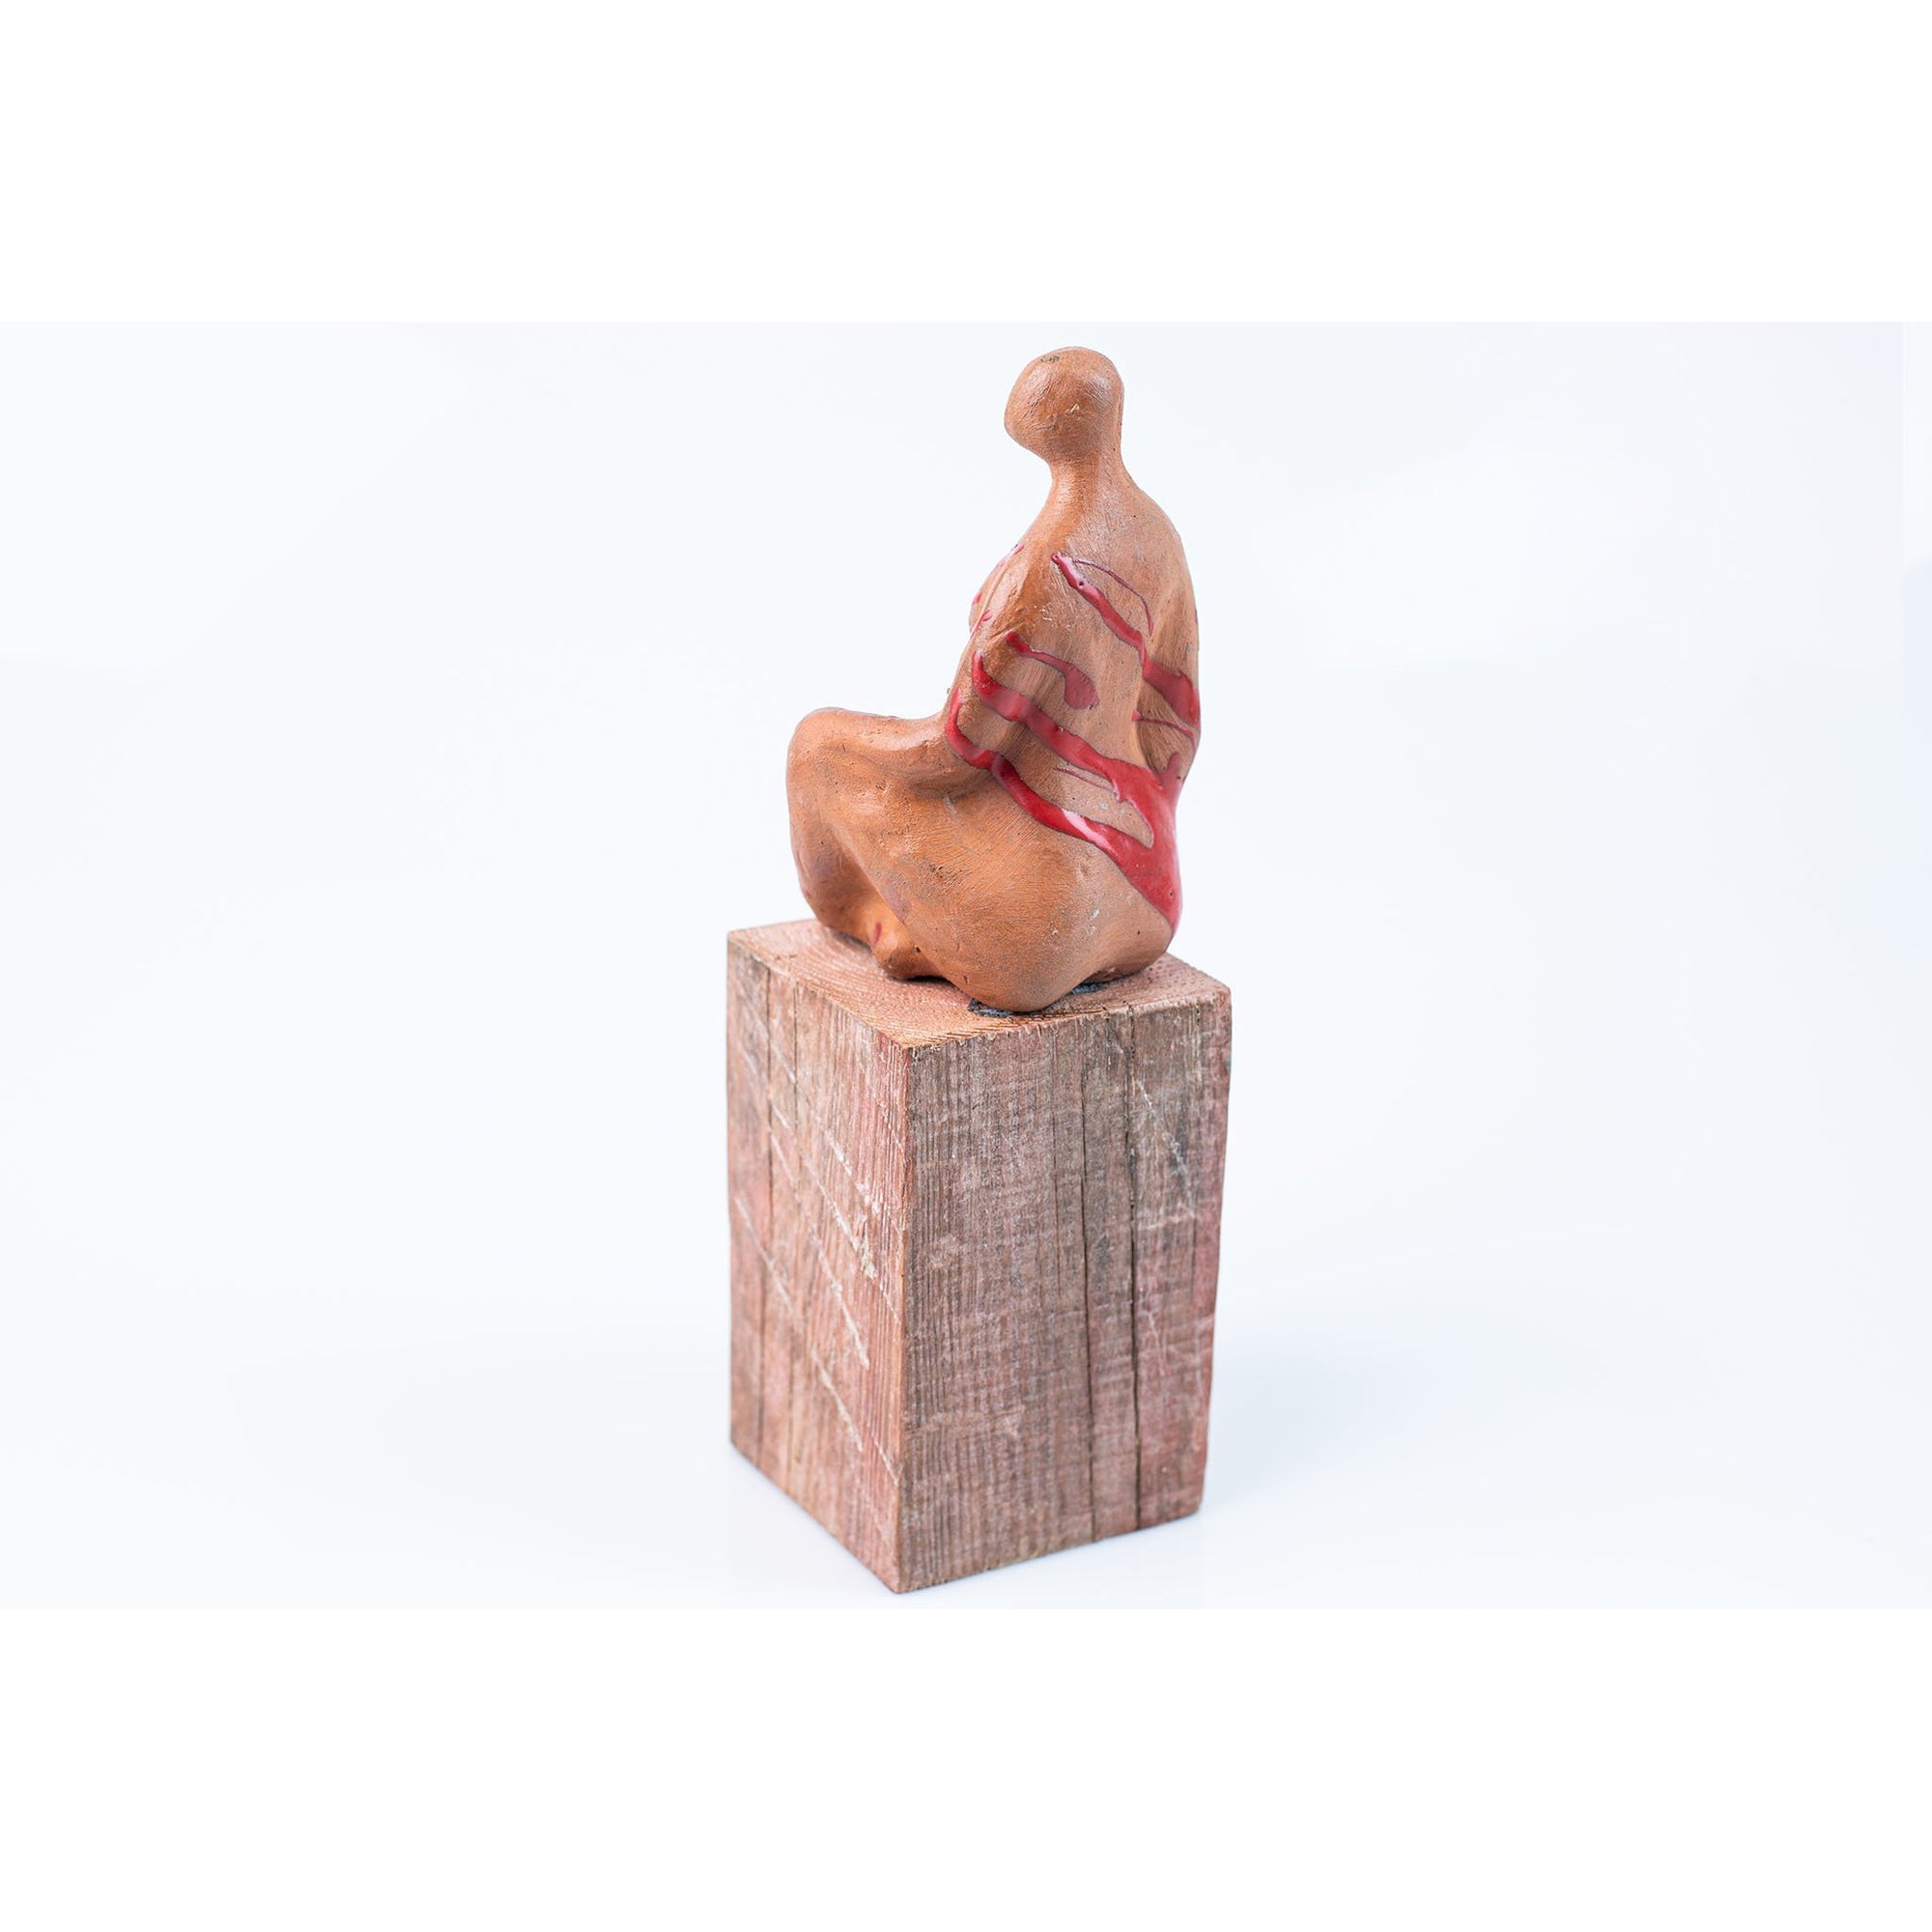 'Fem' seated figure on timber plinth, by Sophie Howard, available from Padstow Gallery, Cornwall